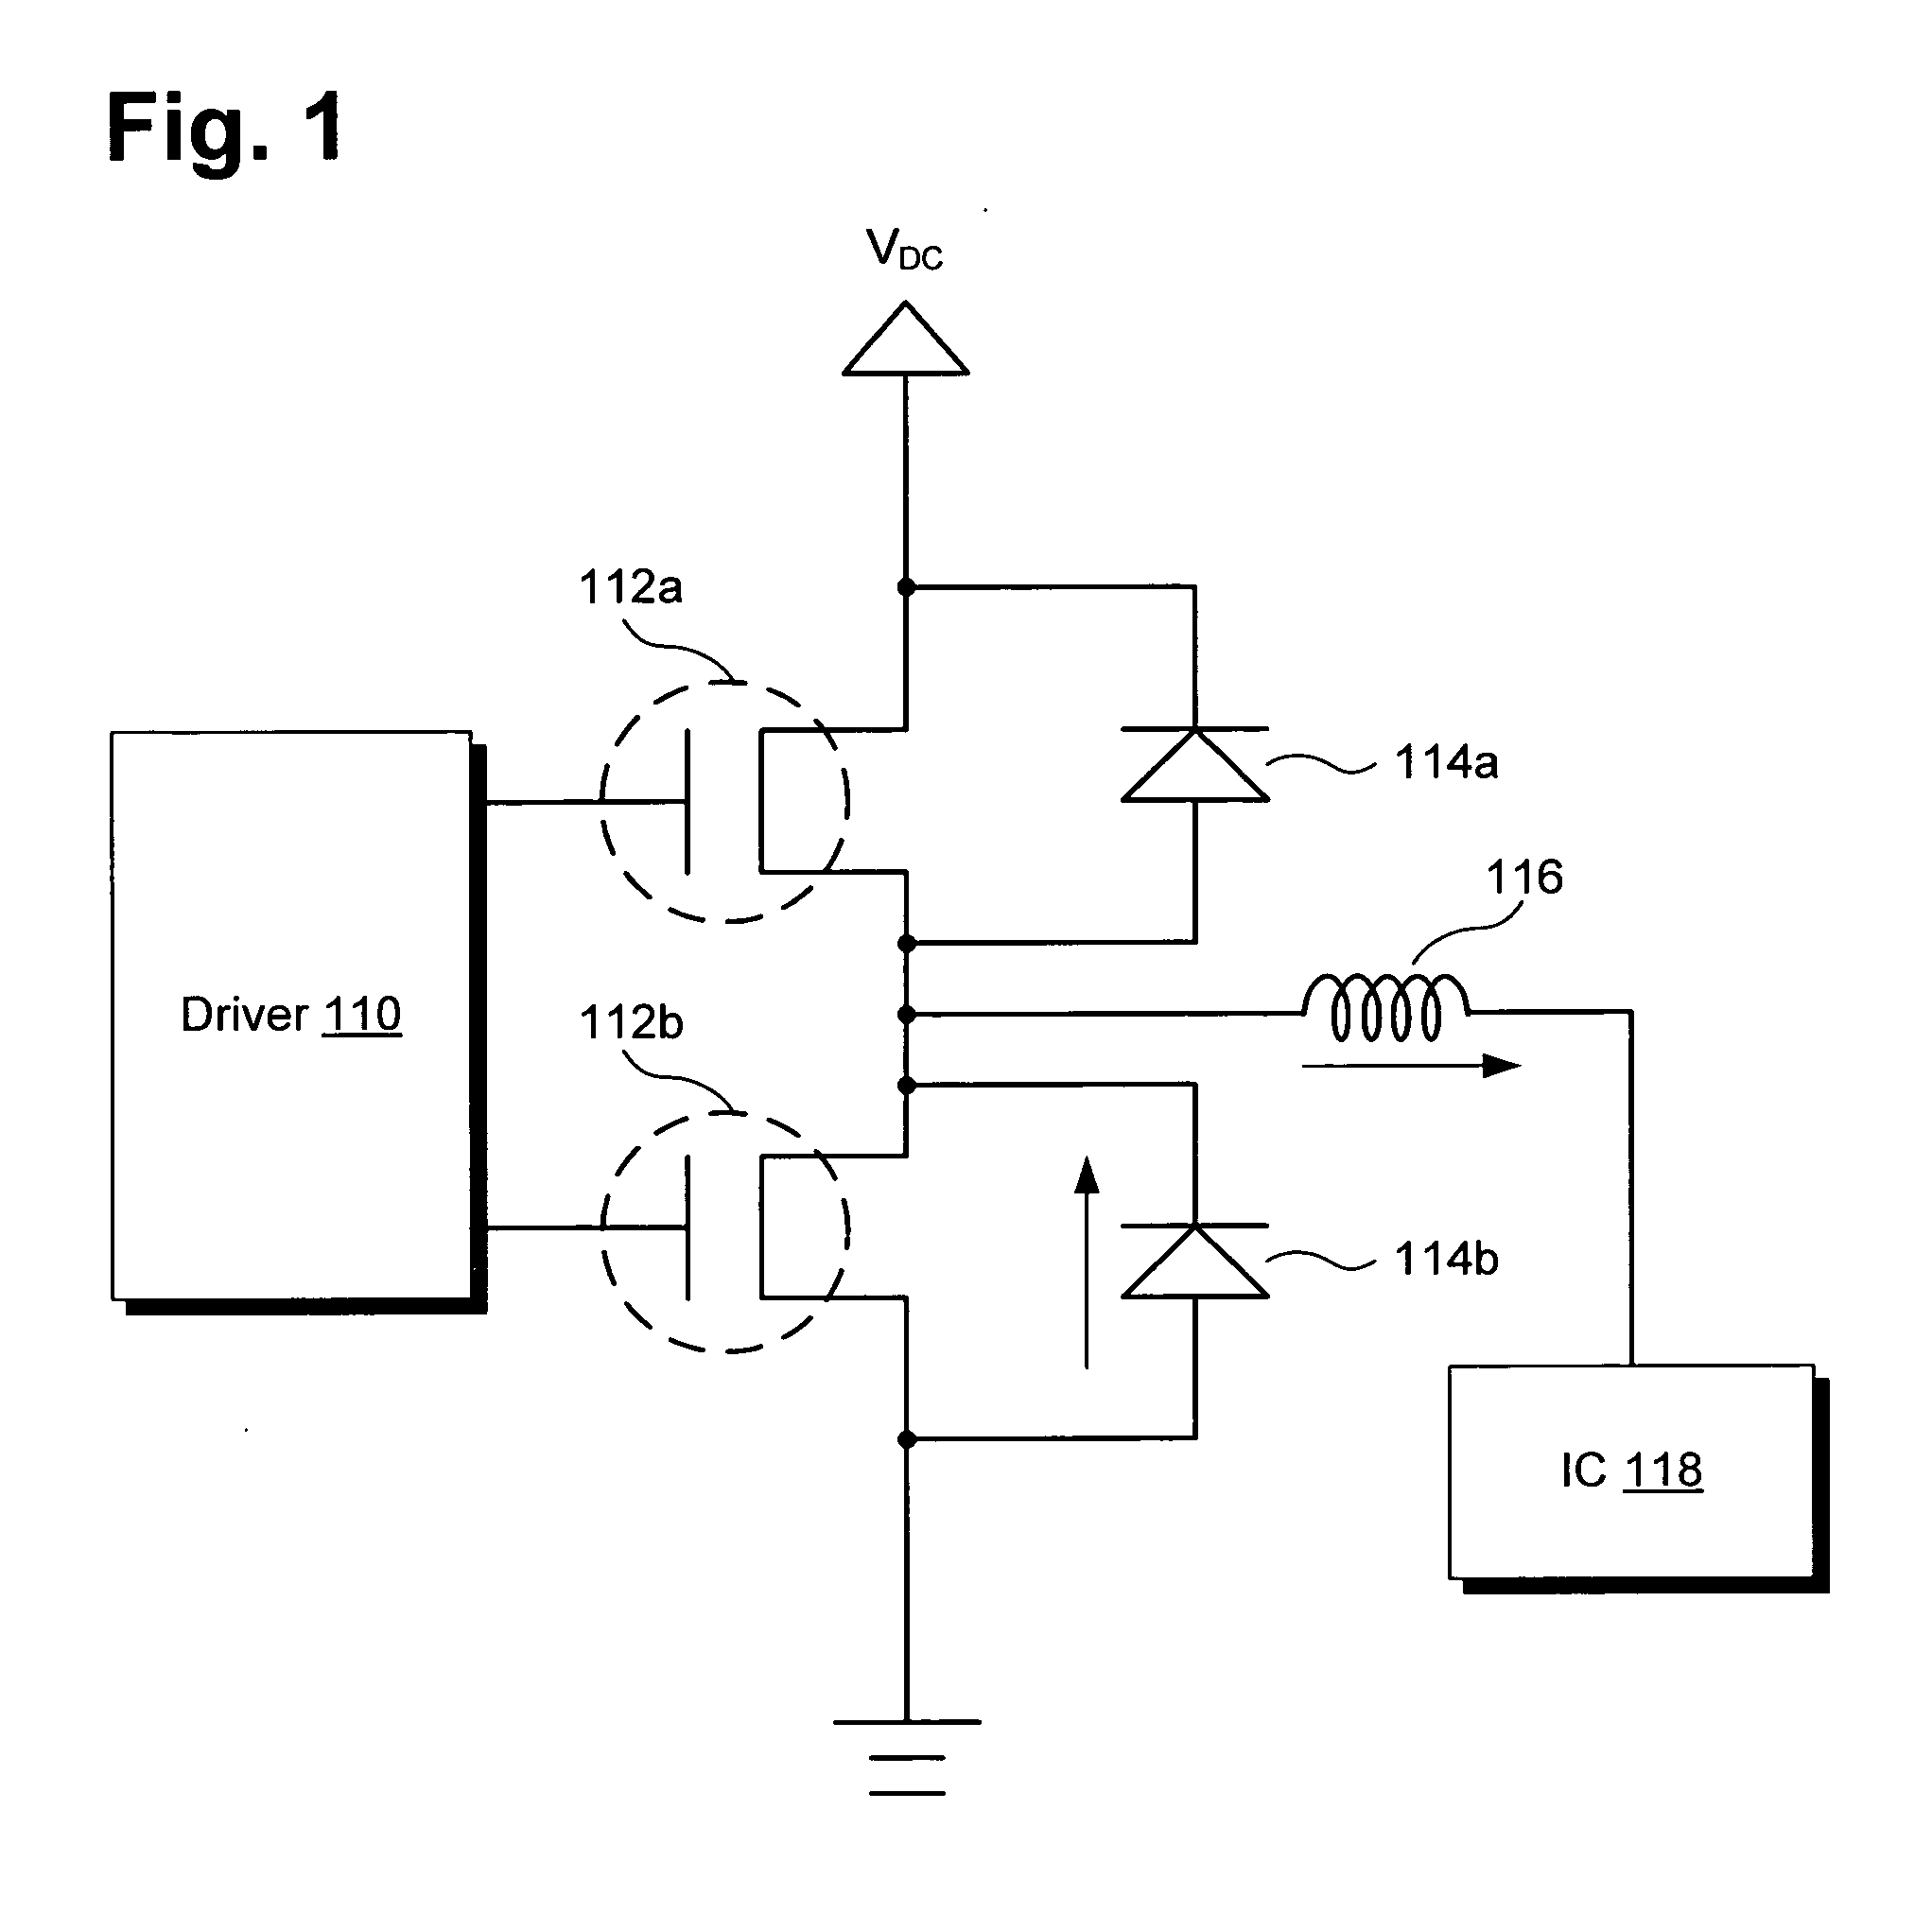 III-nitride switching device with an emulated diode